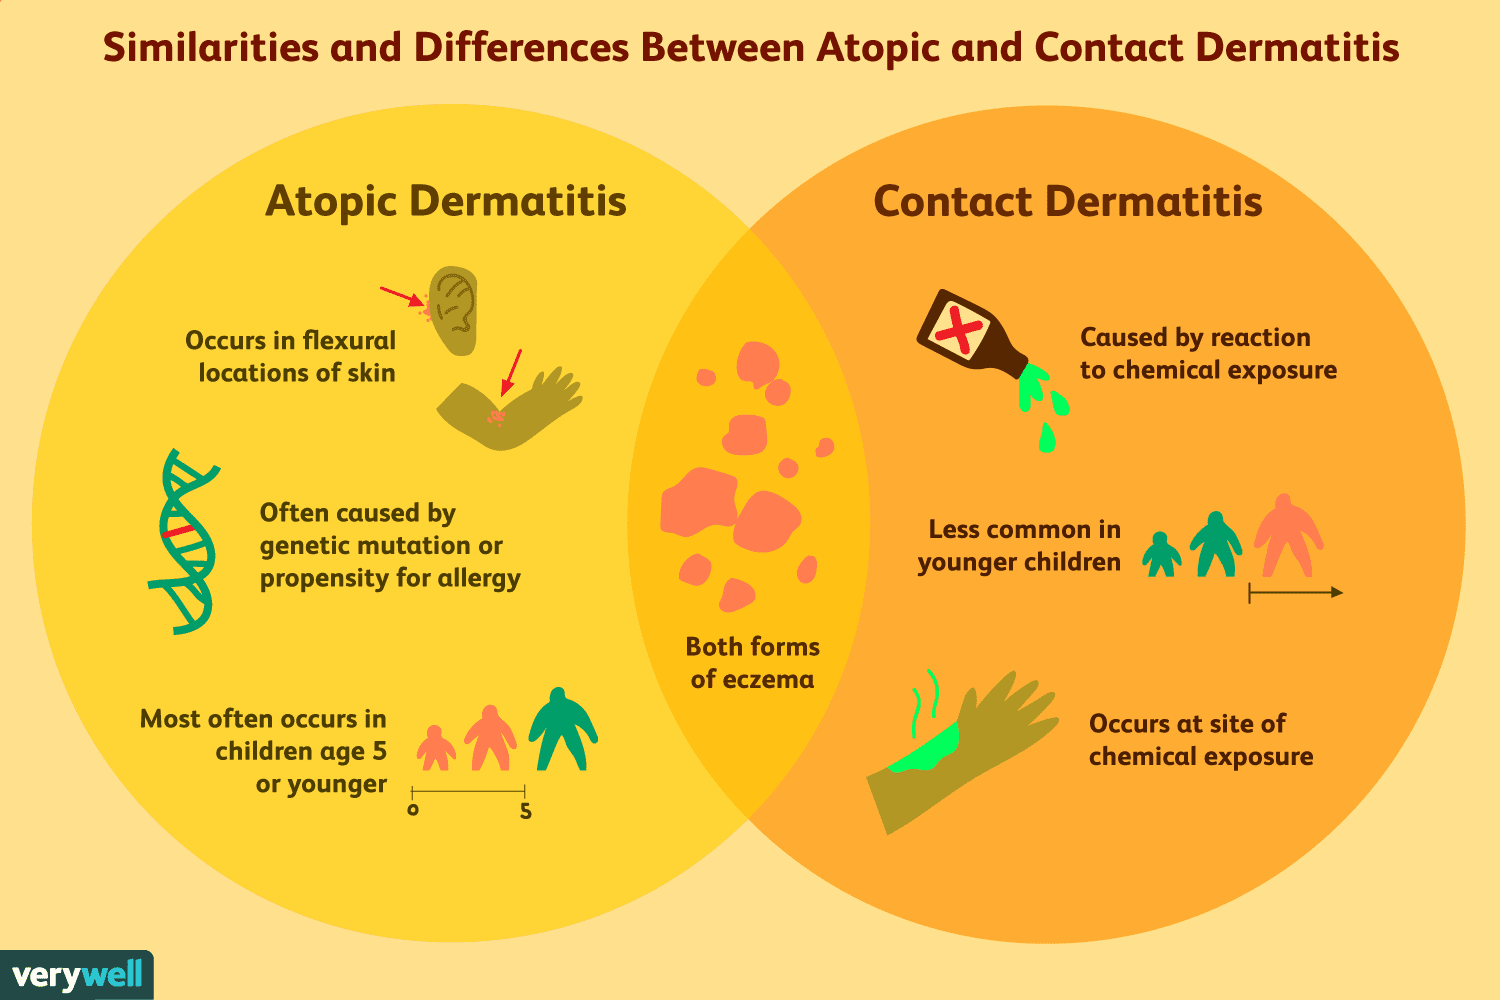 Atopic and Contact Dermatitis: How They Differ